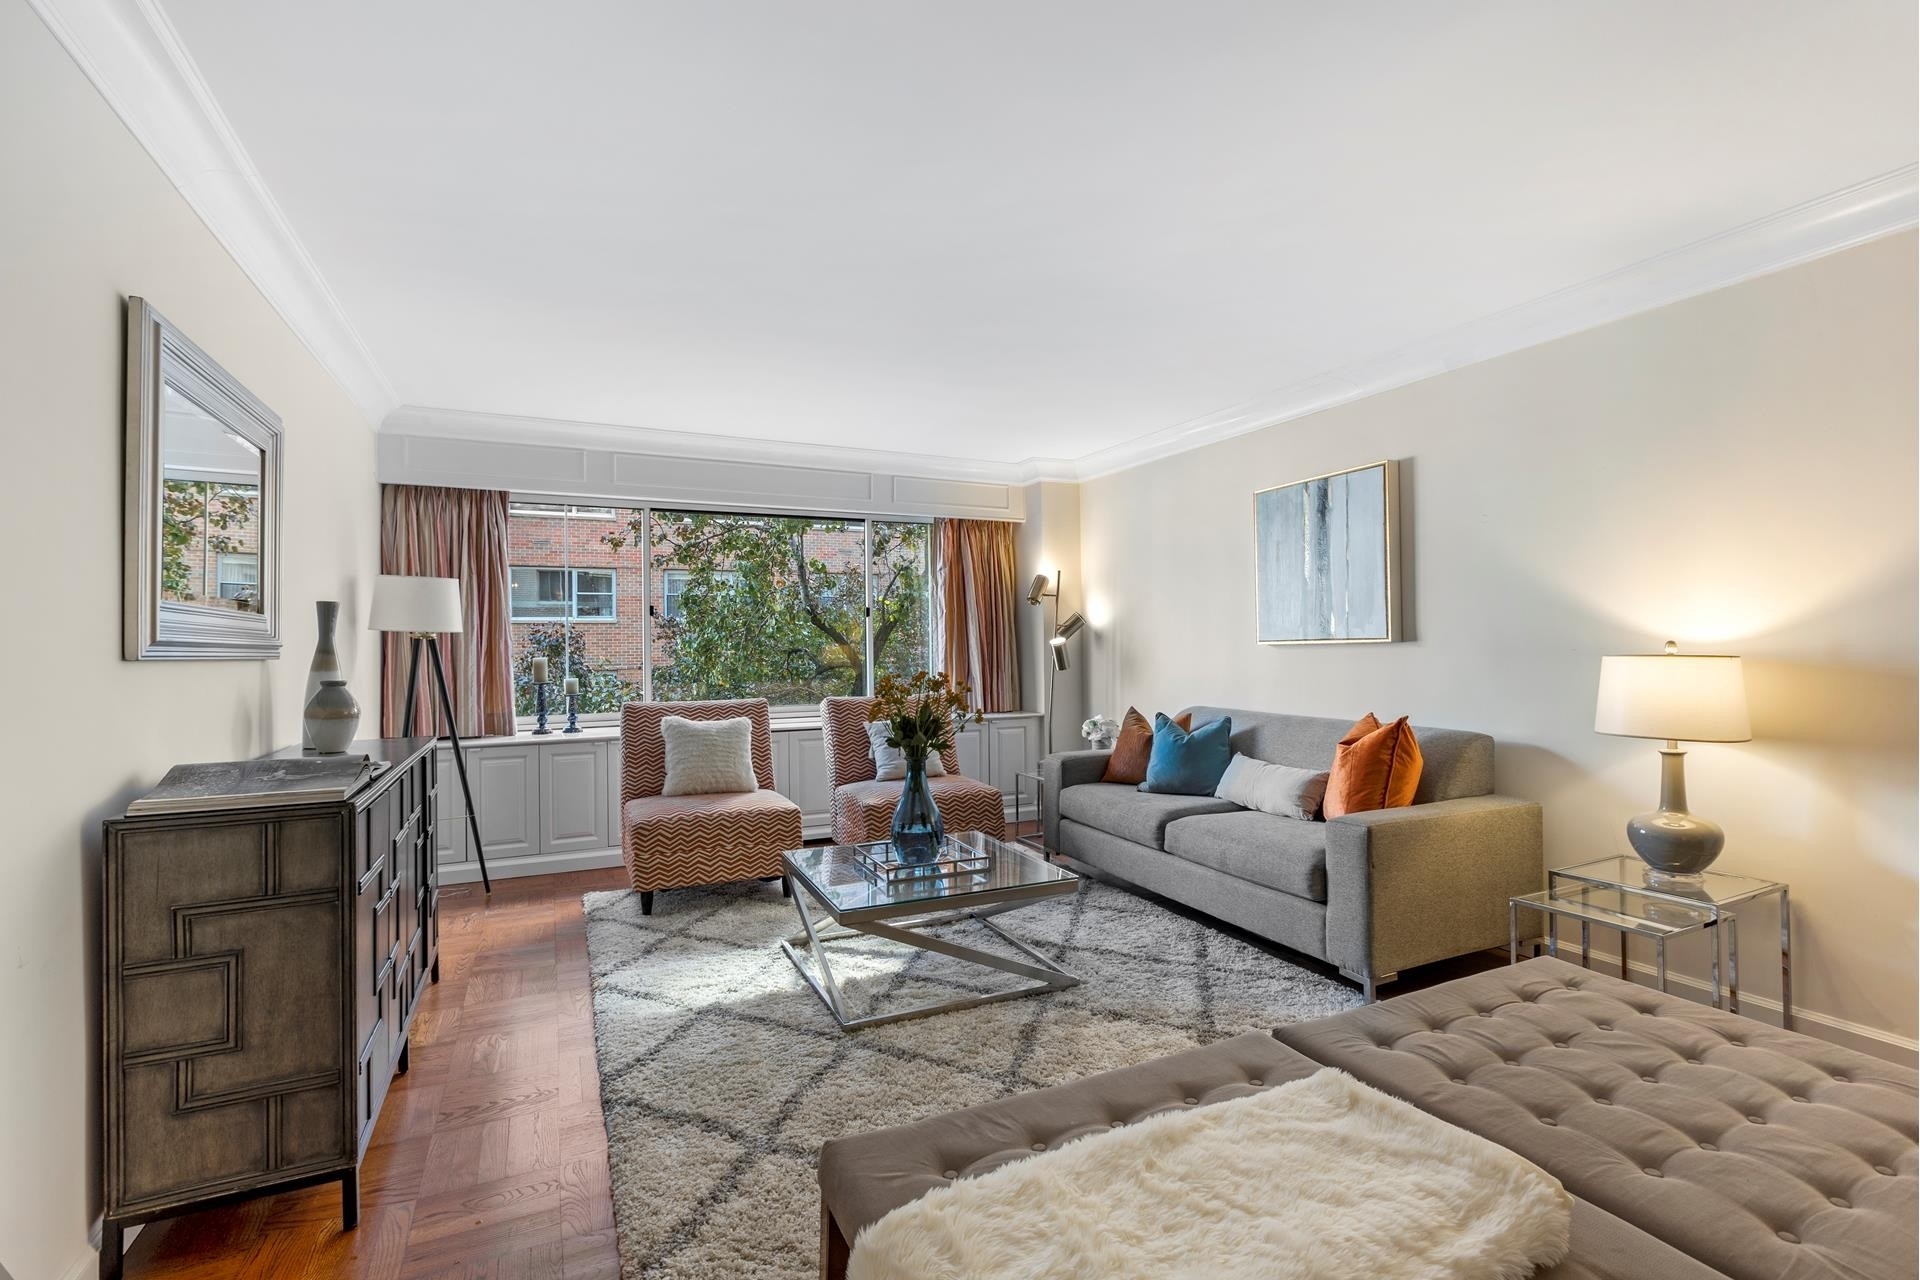 Co-op Properties for Sale at Colony House, 30 E 65TH ST, 4A Lenox Hill, New York, NY 10065